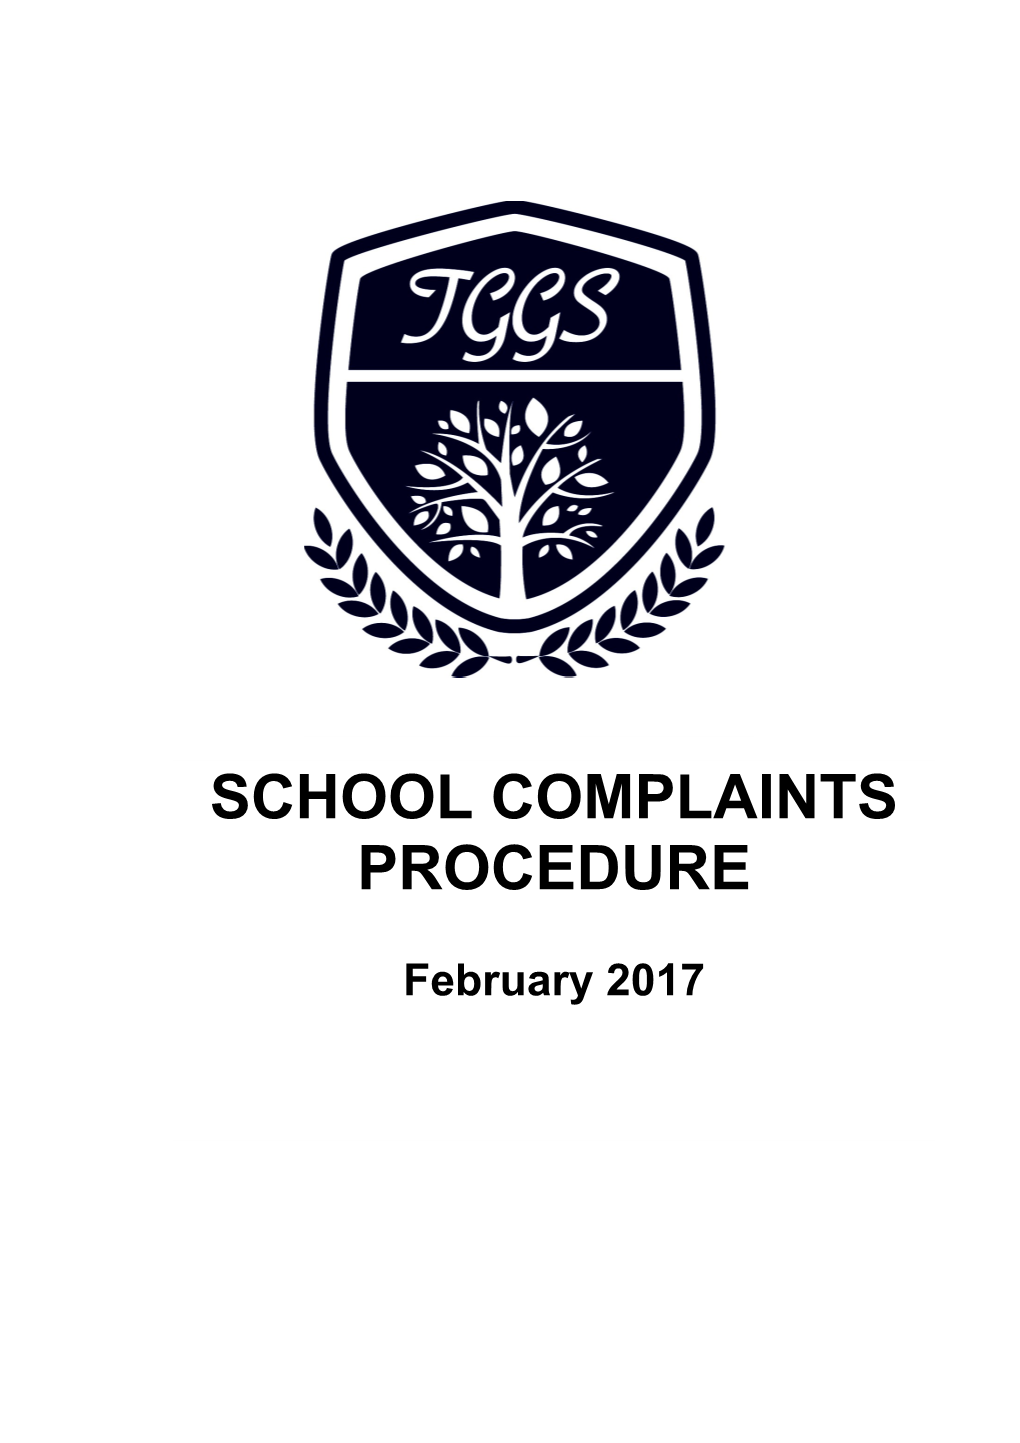 Approved by the Governing Board (GB) 9 February 2017